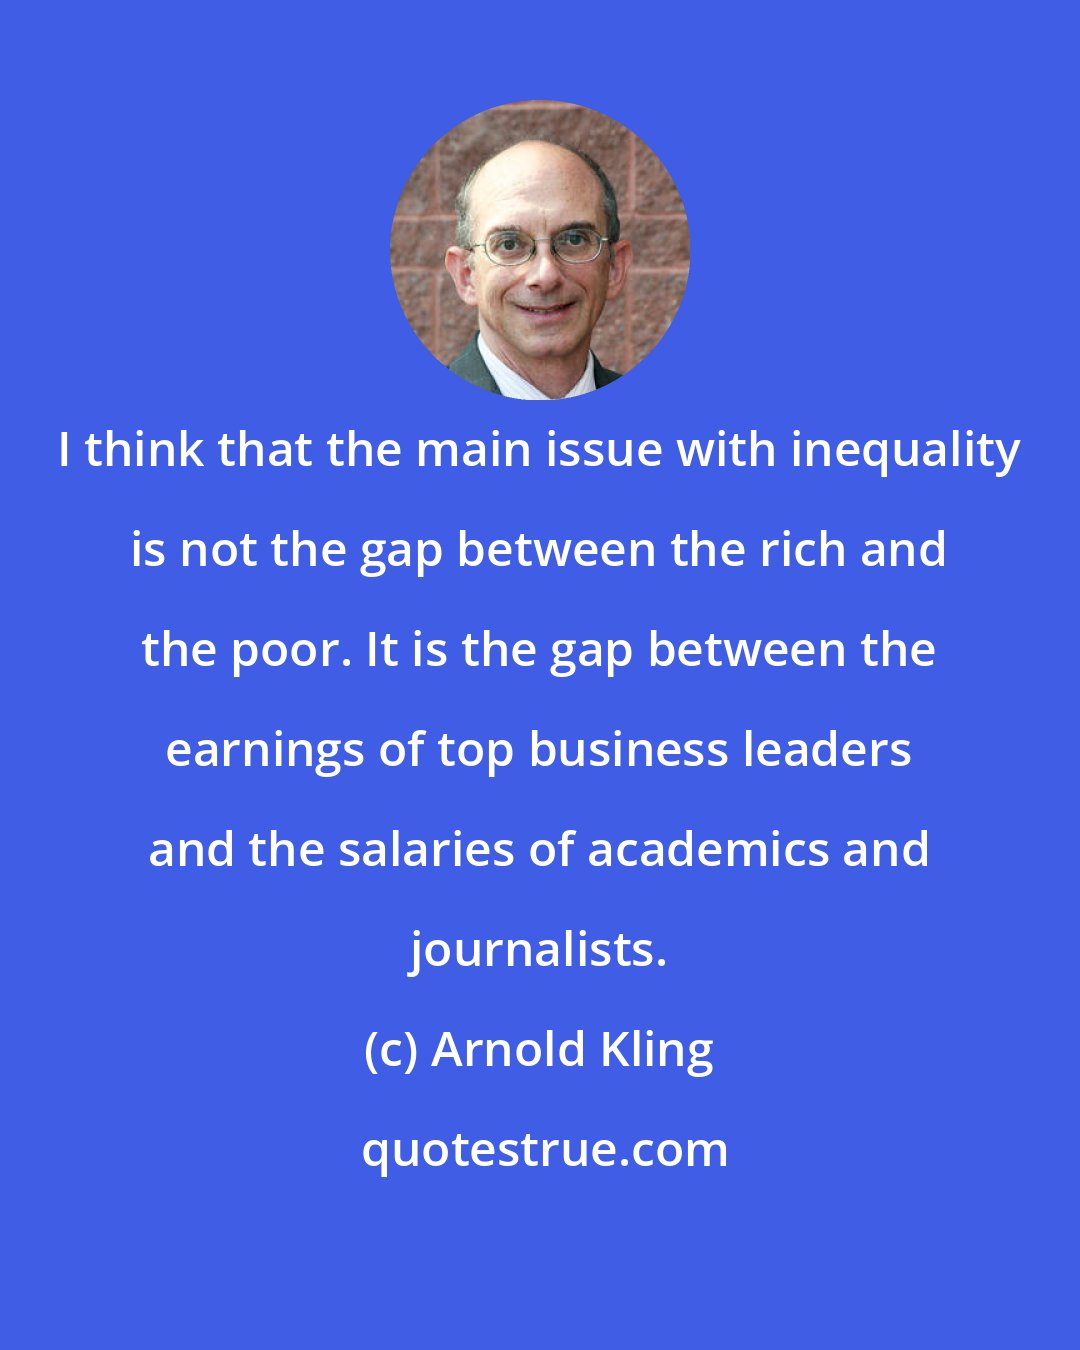 Arnold Kling: I think that the main issue with inequality is not the gap between the rich and the poor. It is the gap between the earnings of top business leaders and the salaries of academics and journalists.